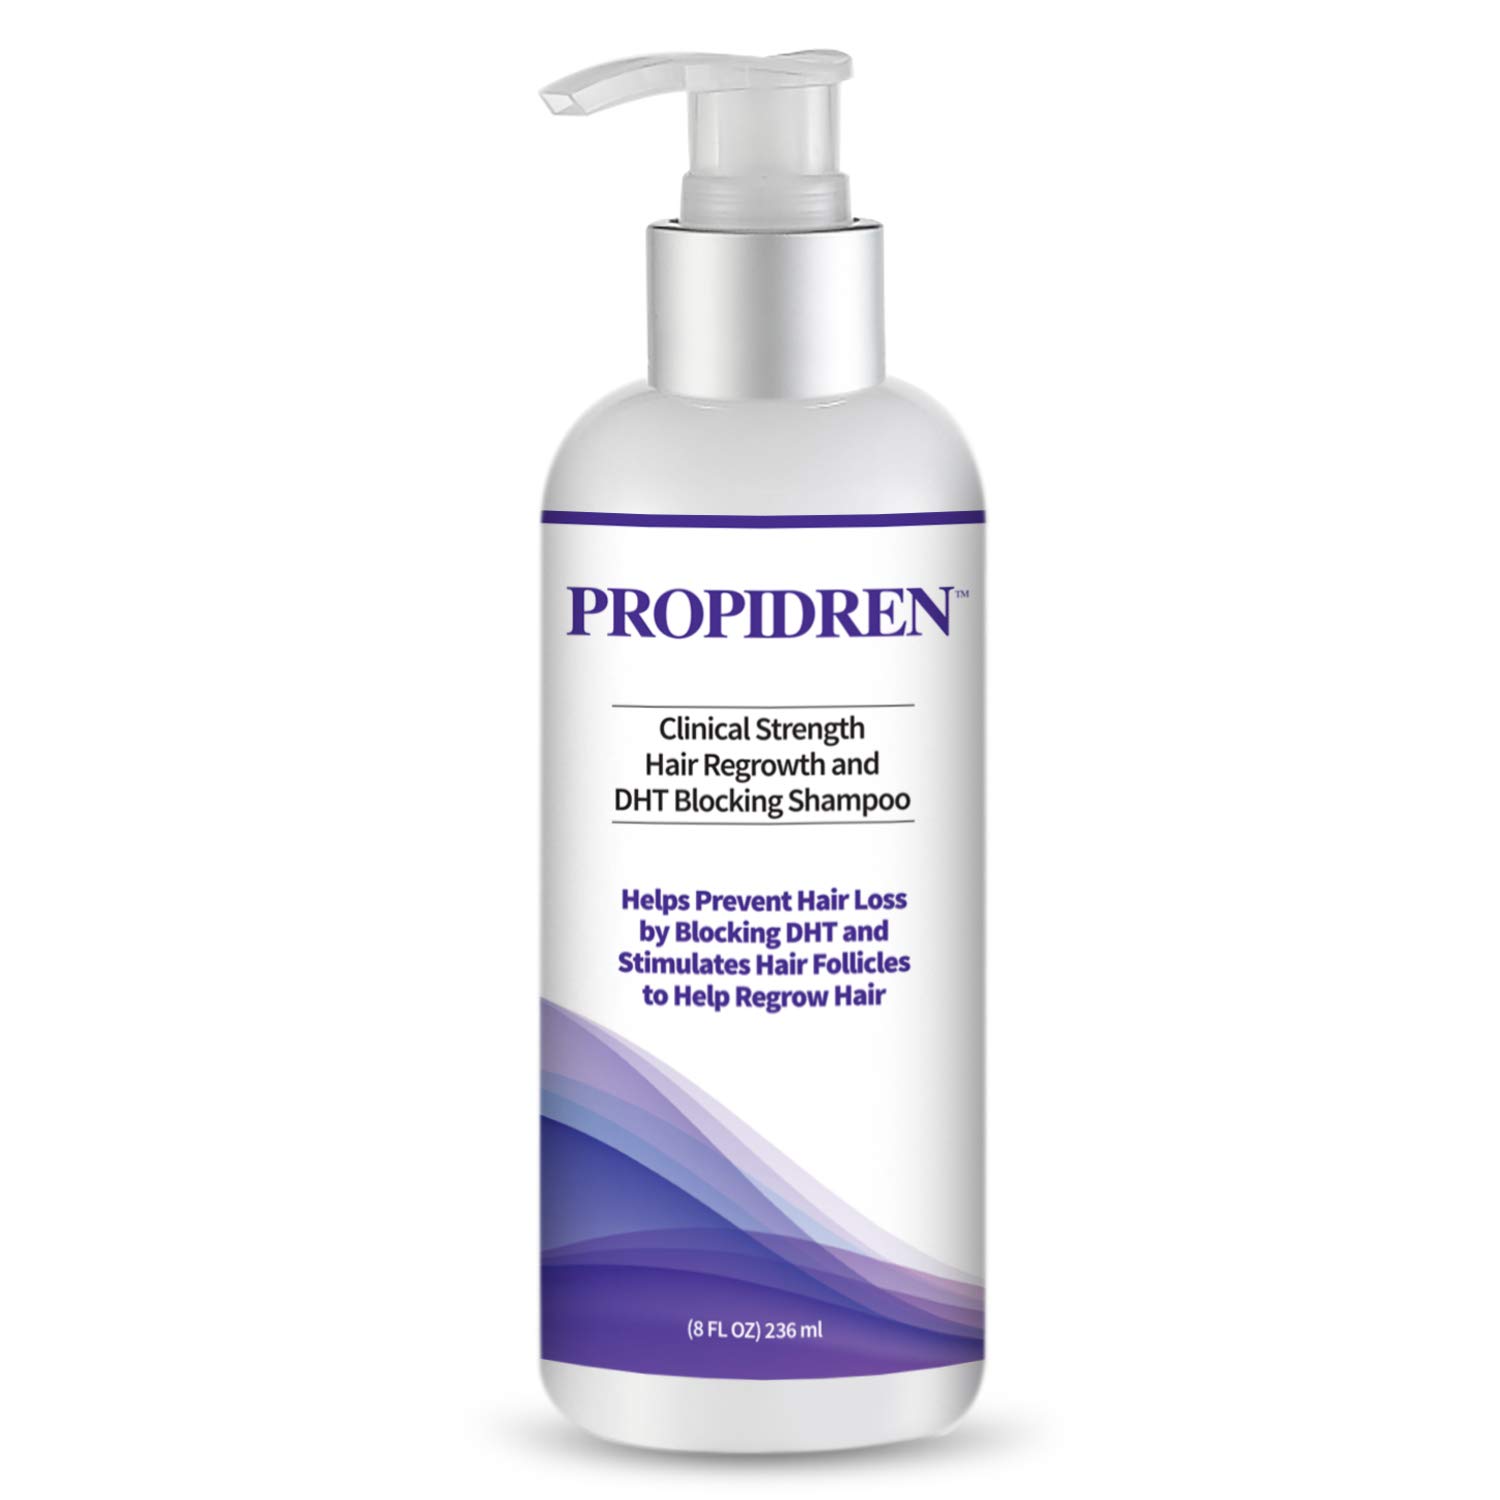 Mua Hairgenics Propidren Hair Growth Shampoo for Thinning and Balding Hair  with Biotin , Keratin, and Powerful DHT Blockers to Prevent Hair Loss,  Nourish and Stimulate Hair Follicles and Help Regrow Hair.